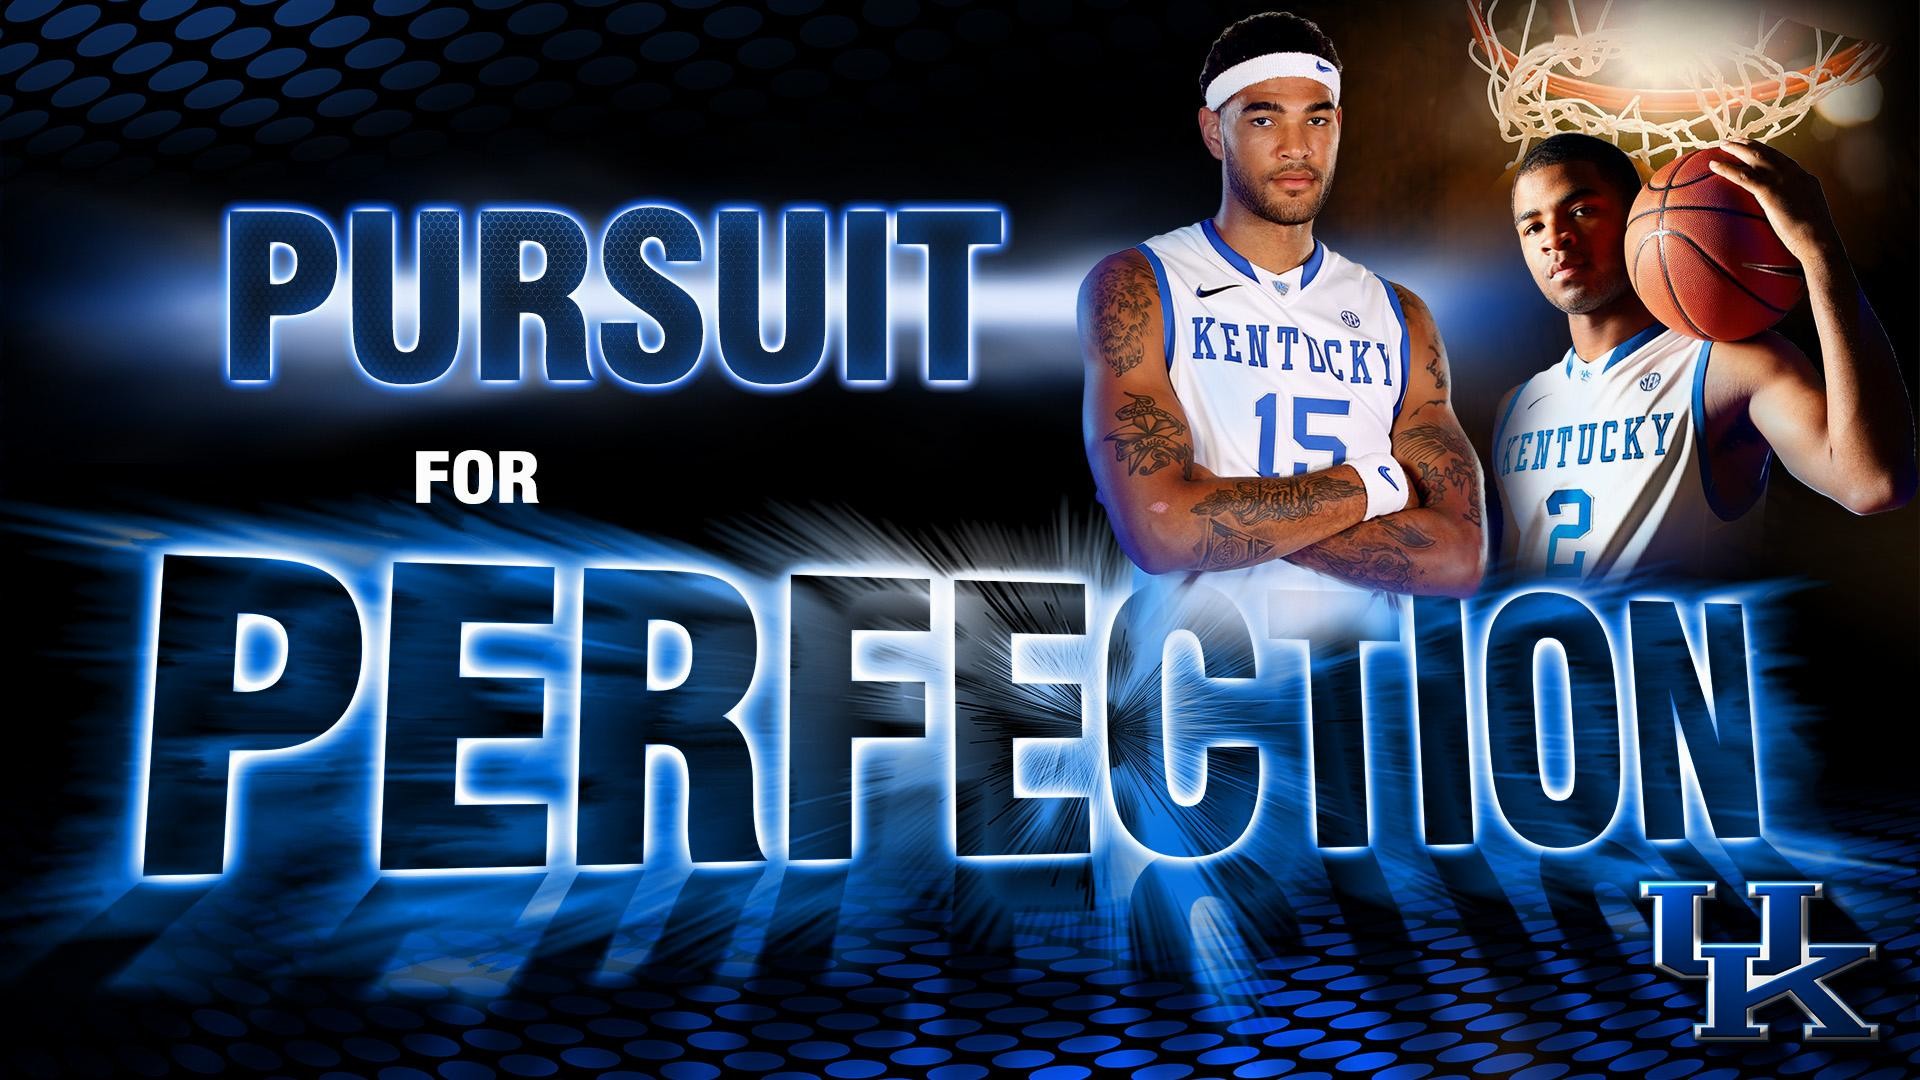 1920x1080 wallpaper wiki awesome kentucky wildcats background pic wpd003162